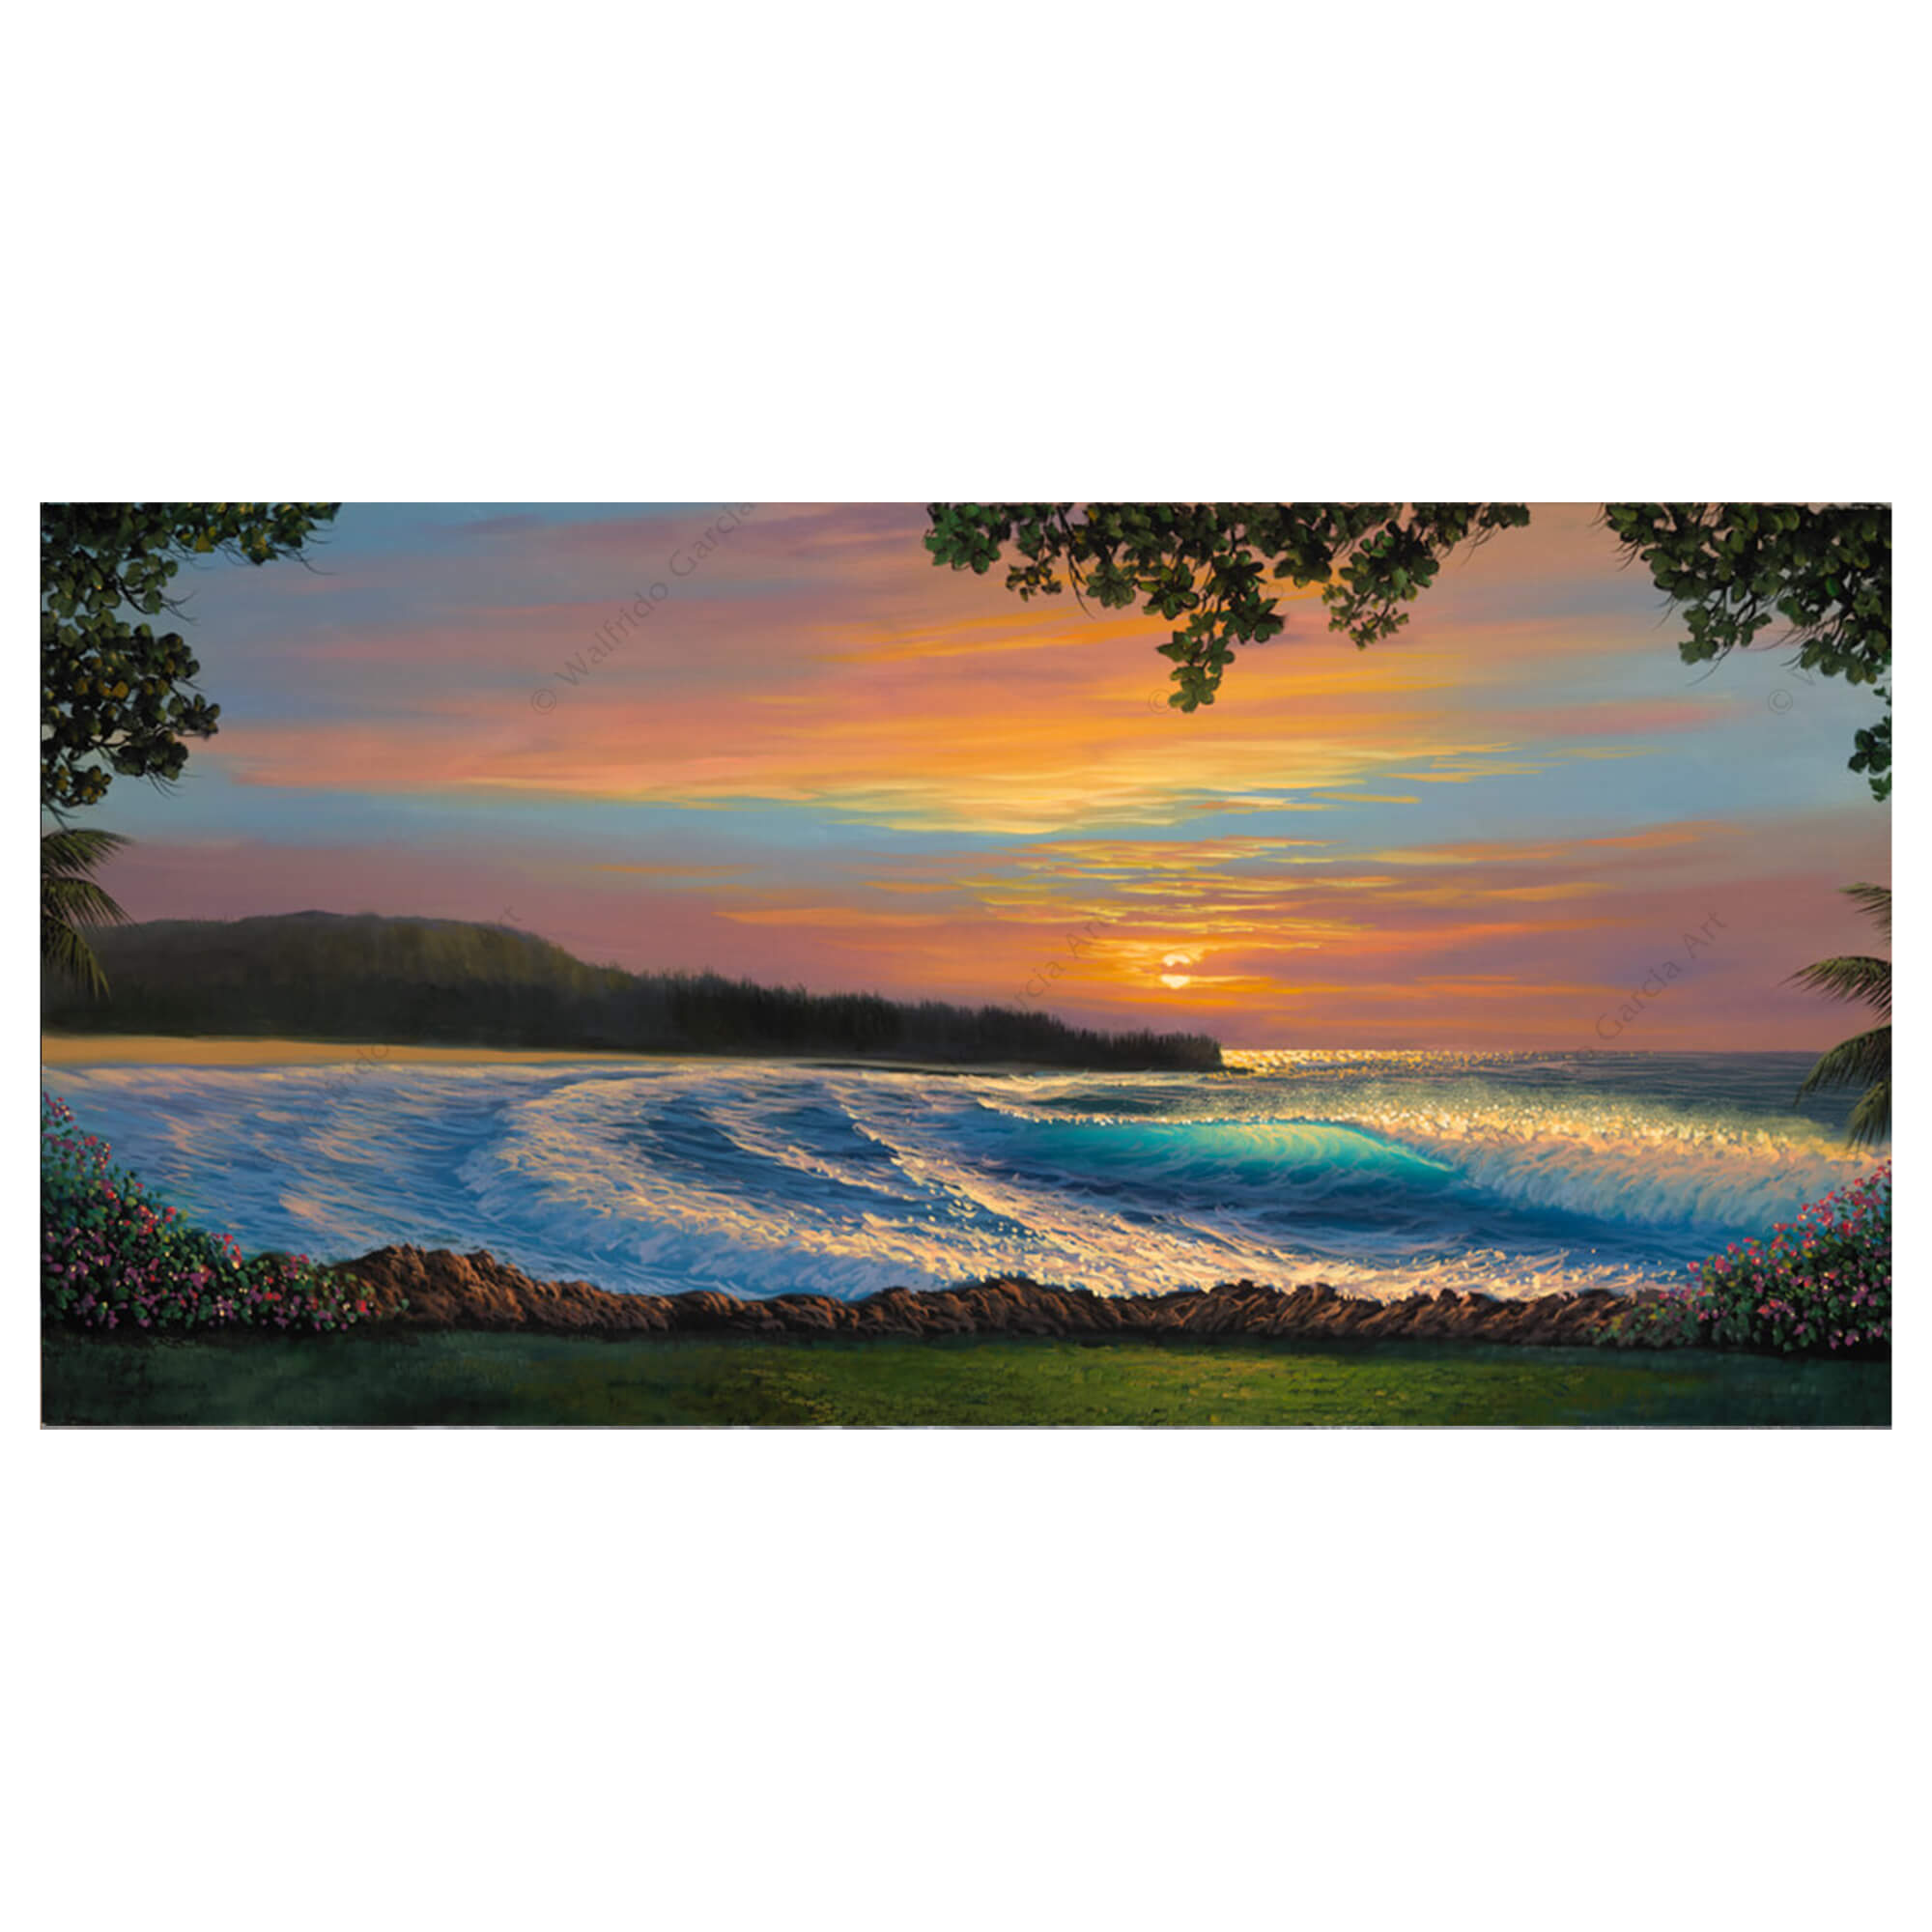 A matted art print of a beautiful view of the tropical scenery at Turtle Bay Resort on the island of Oahu by Hawaii artist Walfrido Garcia